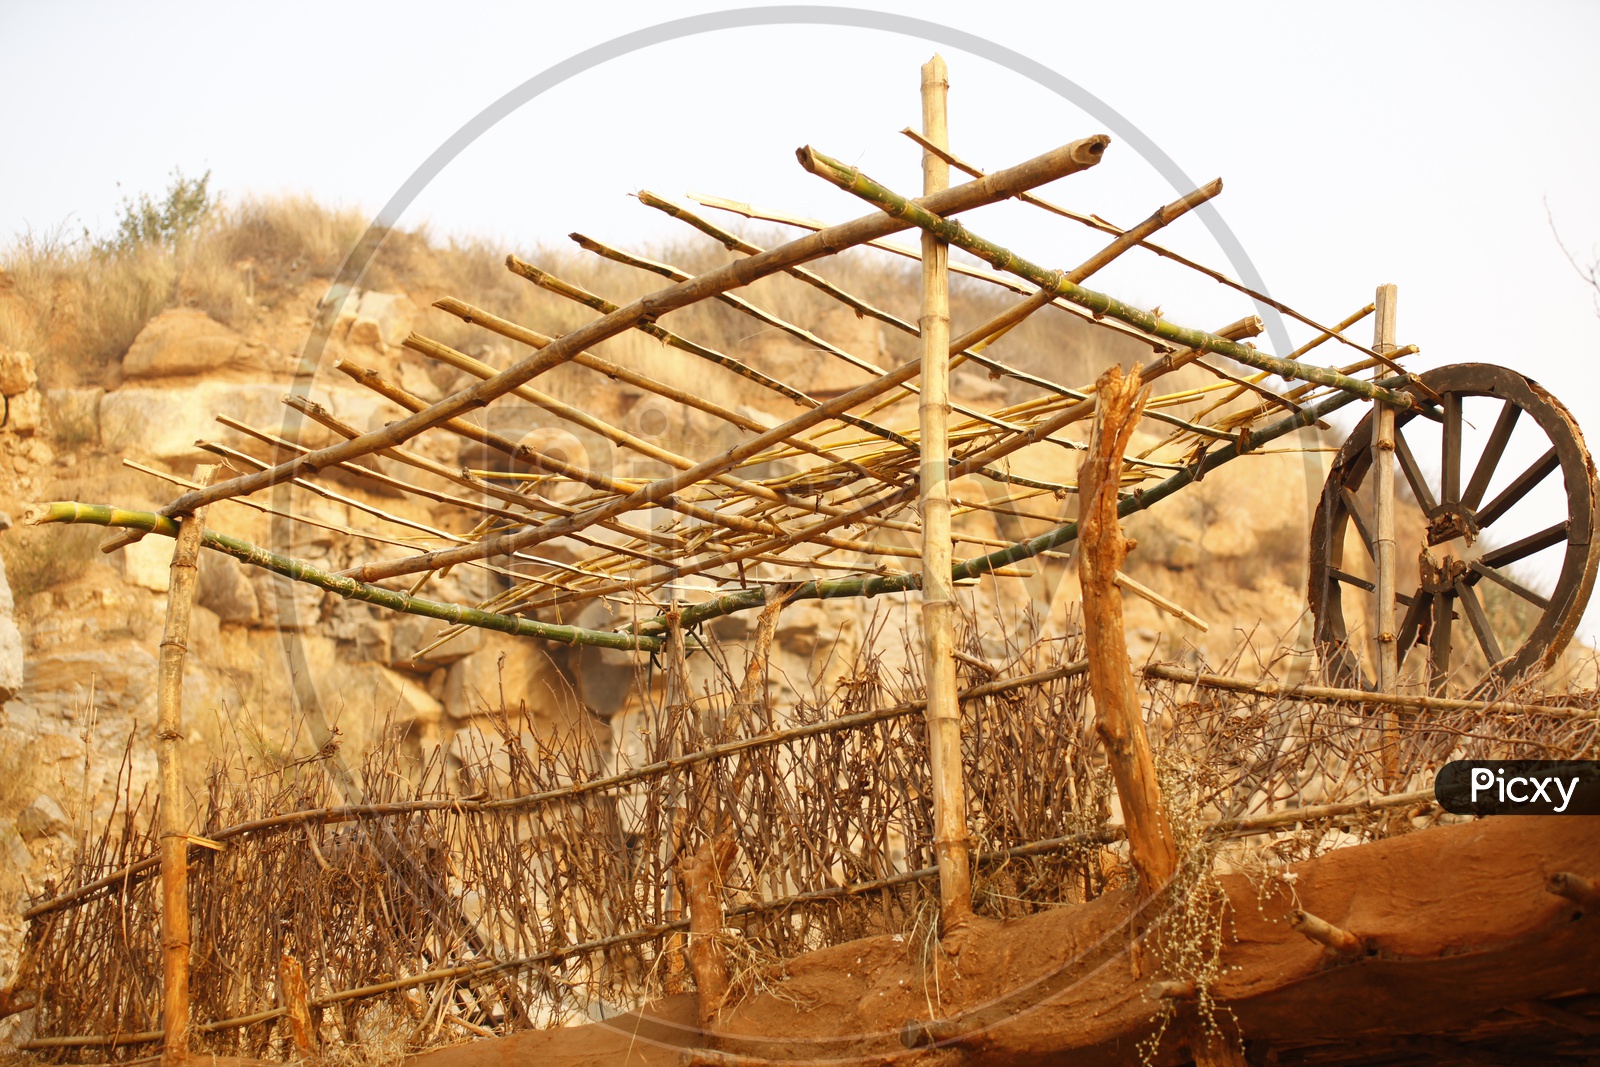 Roof structure using bamboo poles